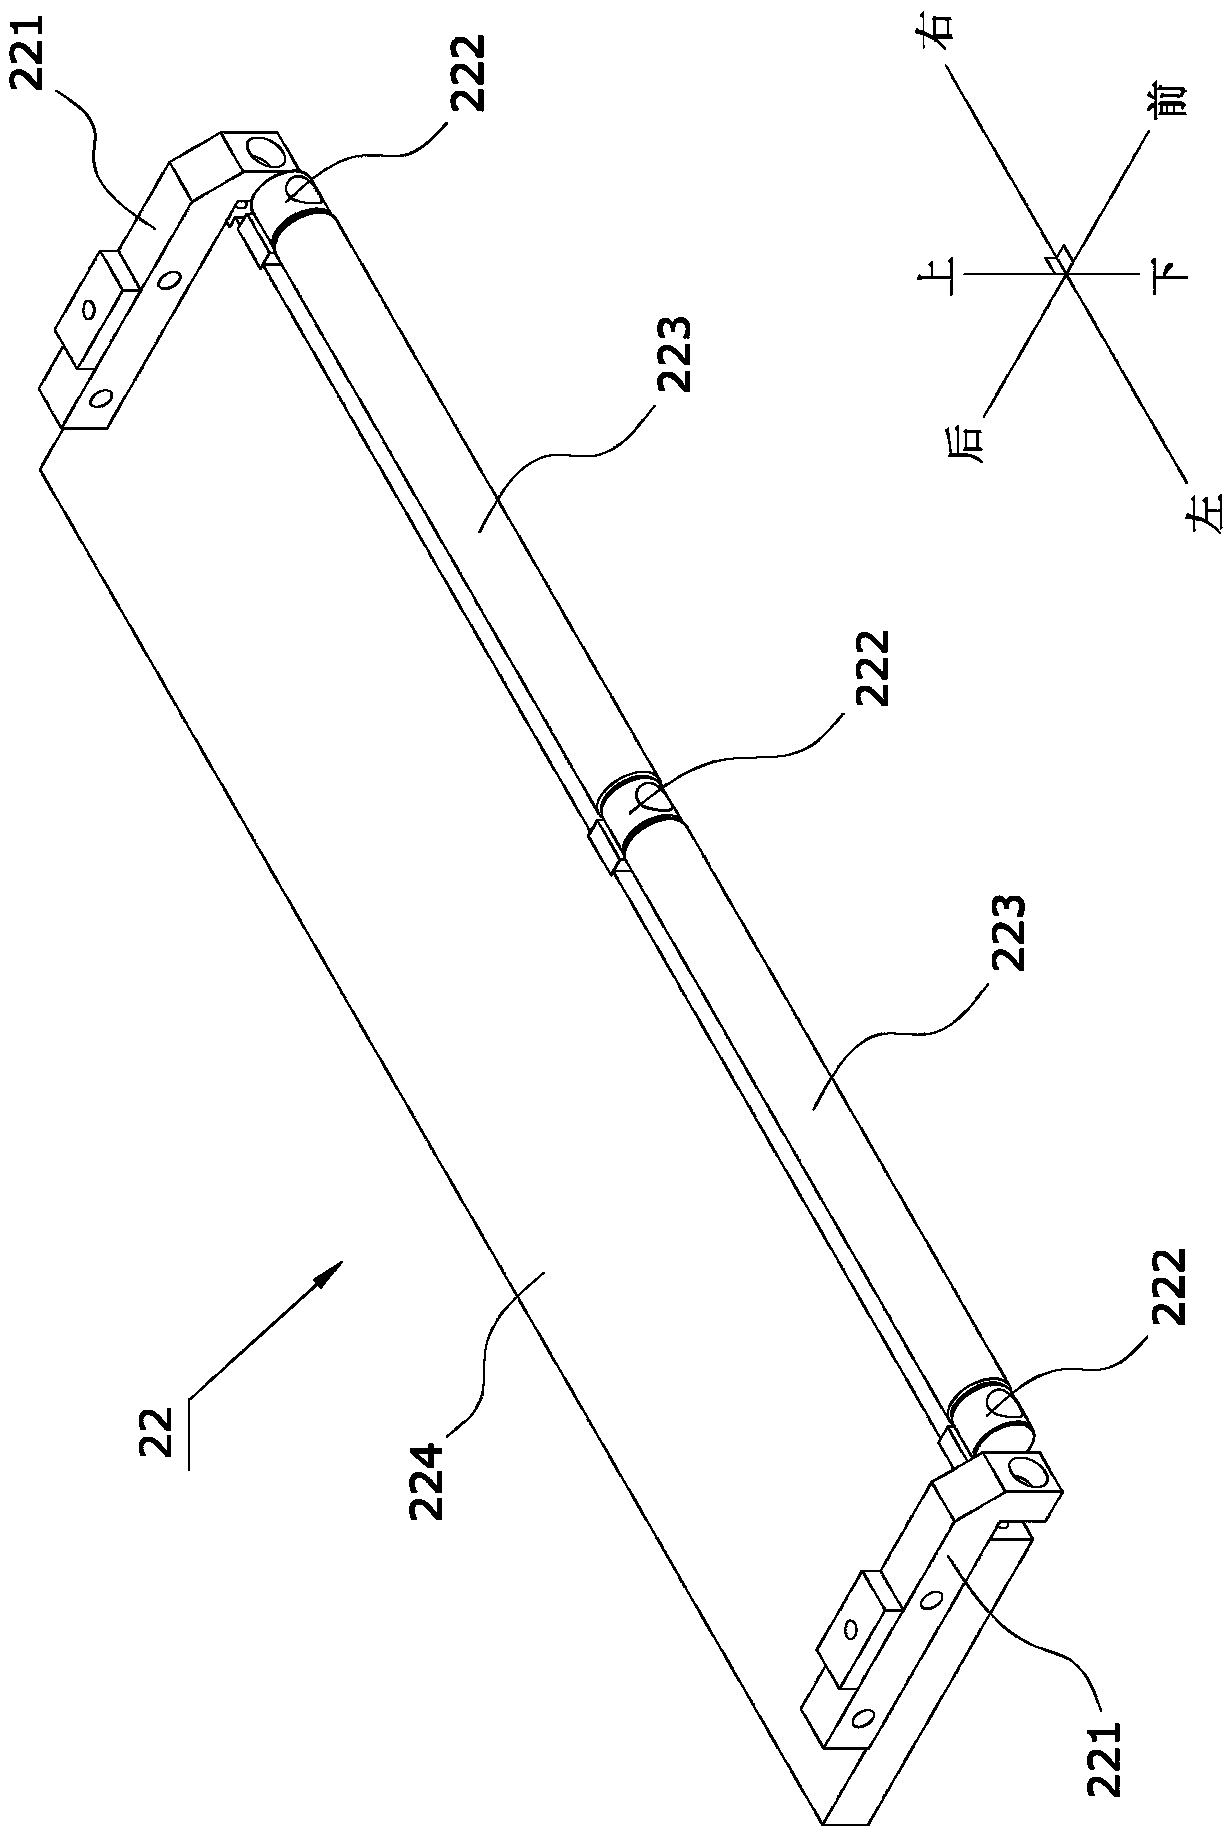 Device for automatically fitting liners and treads of tires of electric vehicles or motorcycles